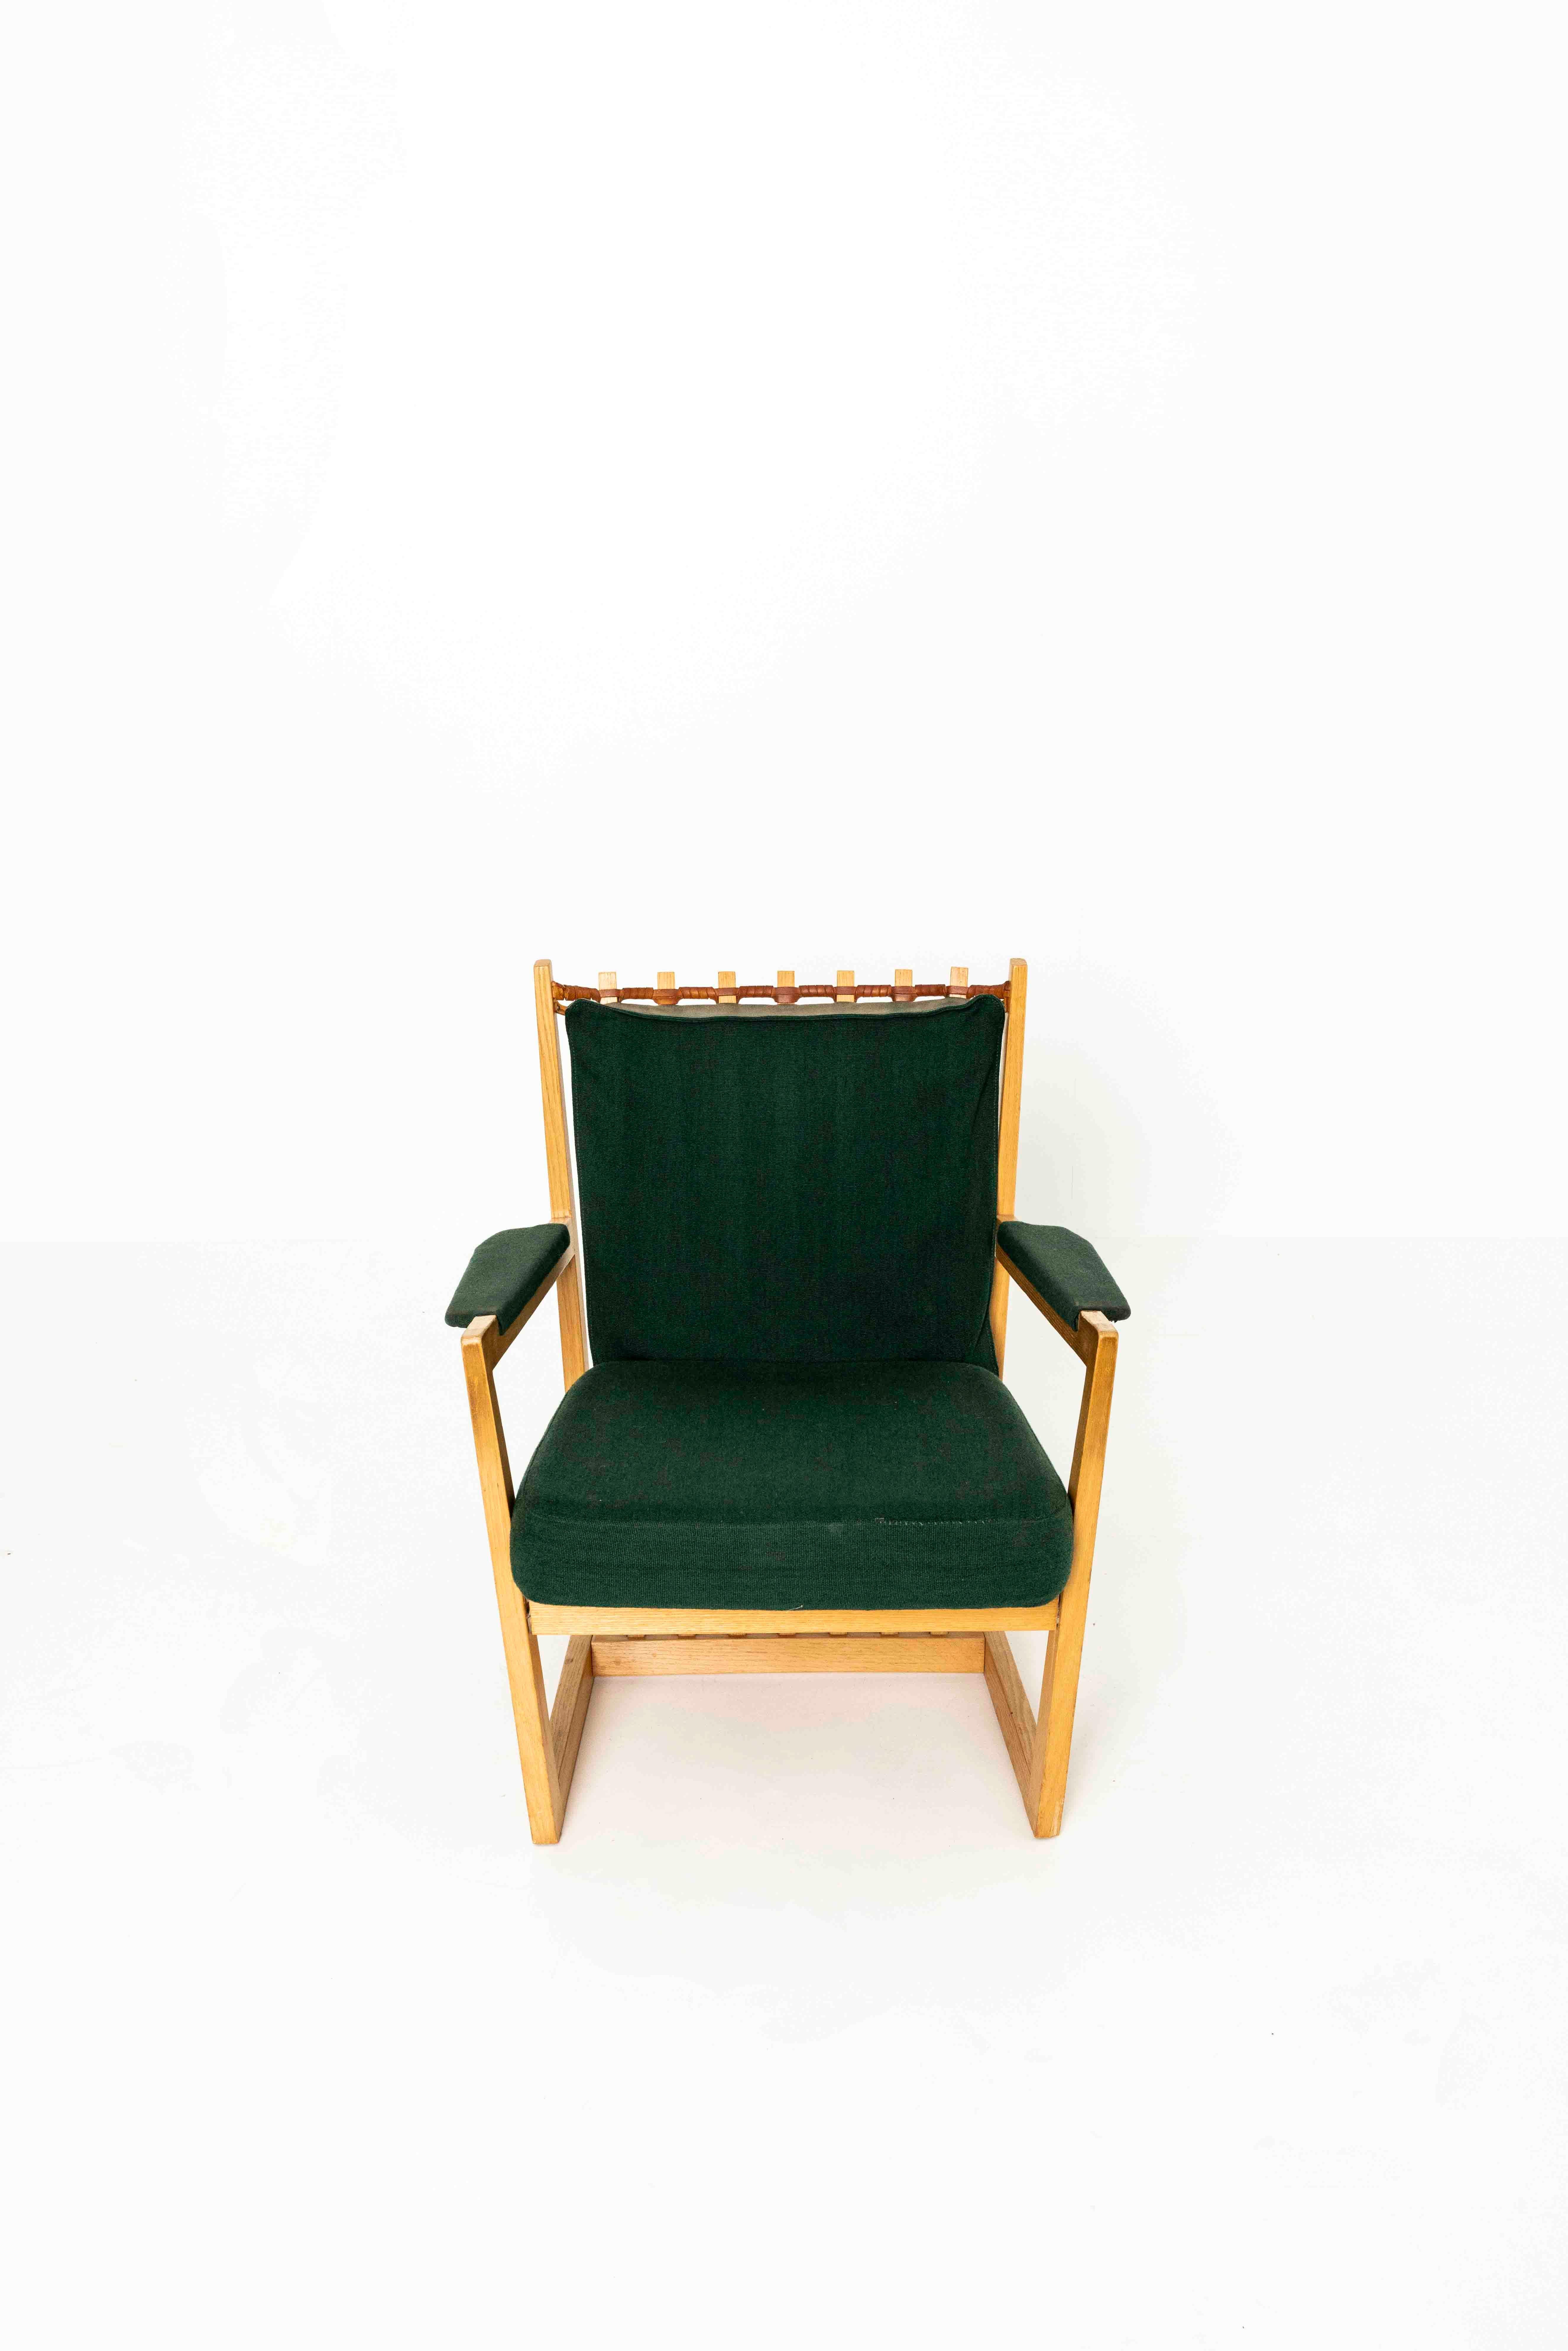 Mid-Century Modern Prototype Chair by Albert Haberer, 1950s Germany